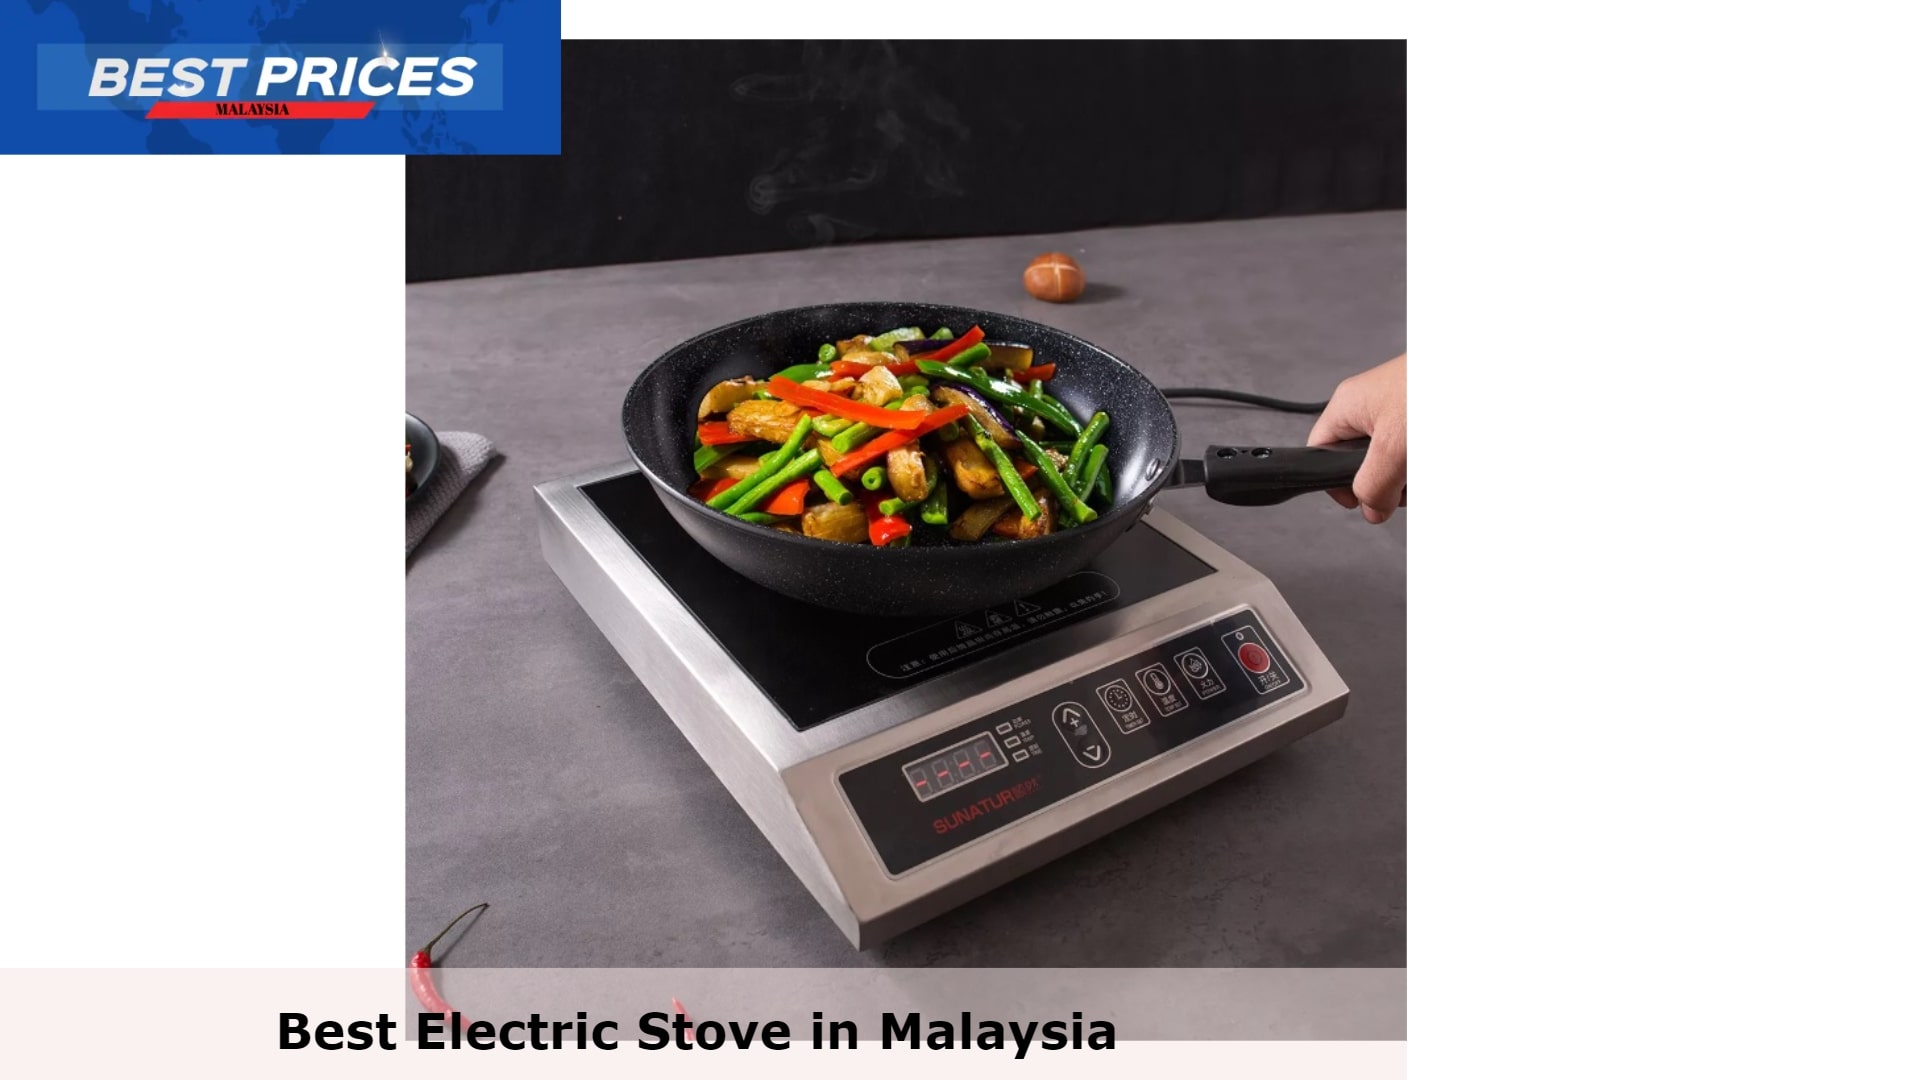 Sunatur Induction Cooker LC-L6 - Electric Stove Malaysia, Electric Stove Malaysia, Best Electric Stove Malaysia, hich electric stove is best in Malaysia?, Which is the best electric stove?, Which is better electric stove or gas stove?, How much do electric stoves cost?, electric stove malaysia review, 
rubine electric stove, electric stove ceramic, built-in electric stove malaysia, 
portable electric stove, electric stove vs induction cooker, electric stove electrolux, 
electric stove vs gas stove malaysia,